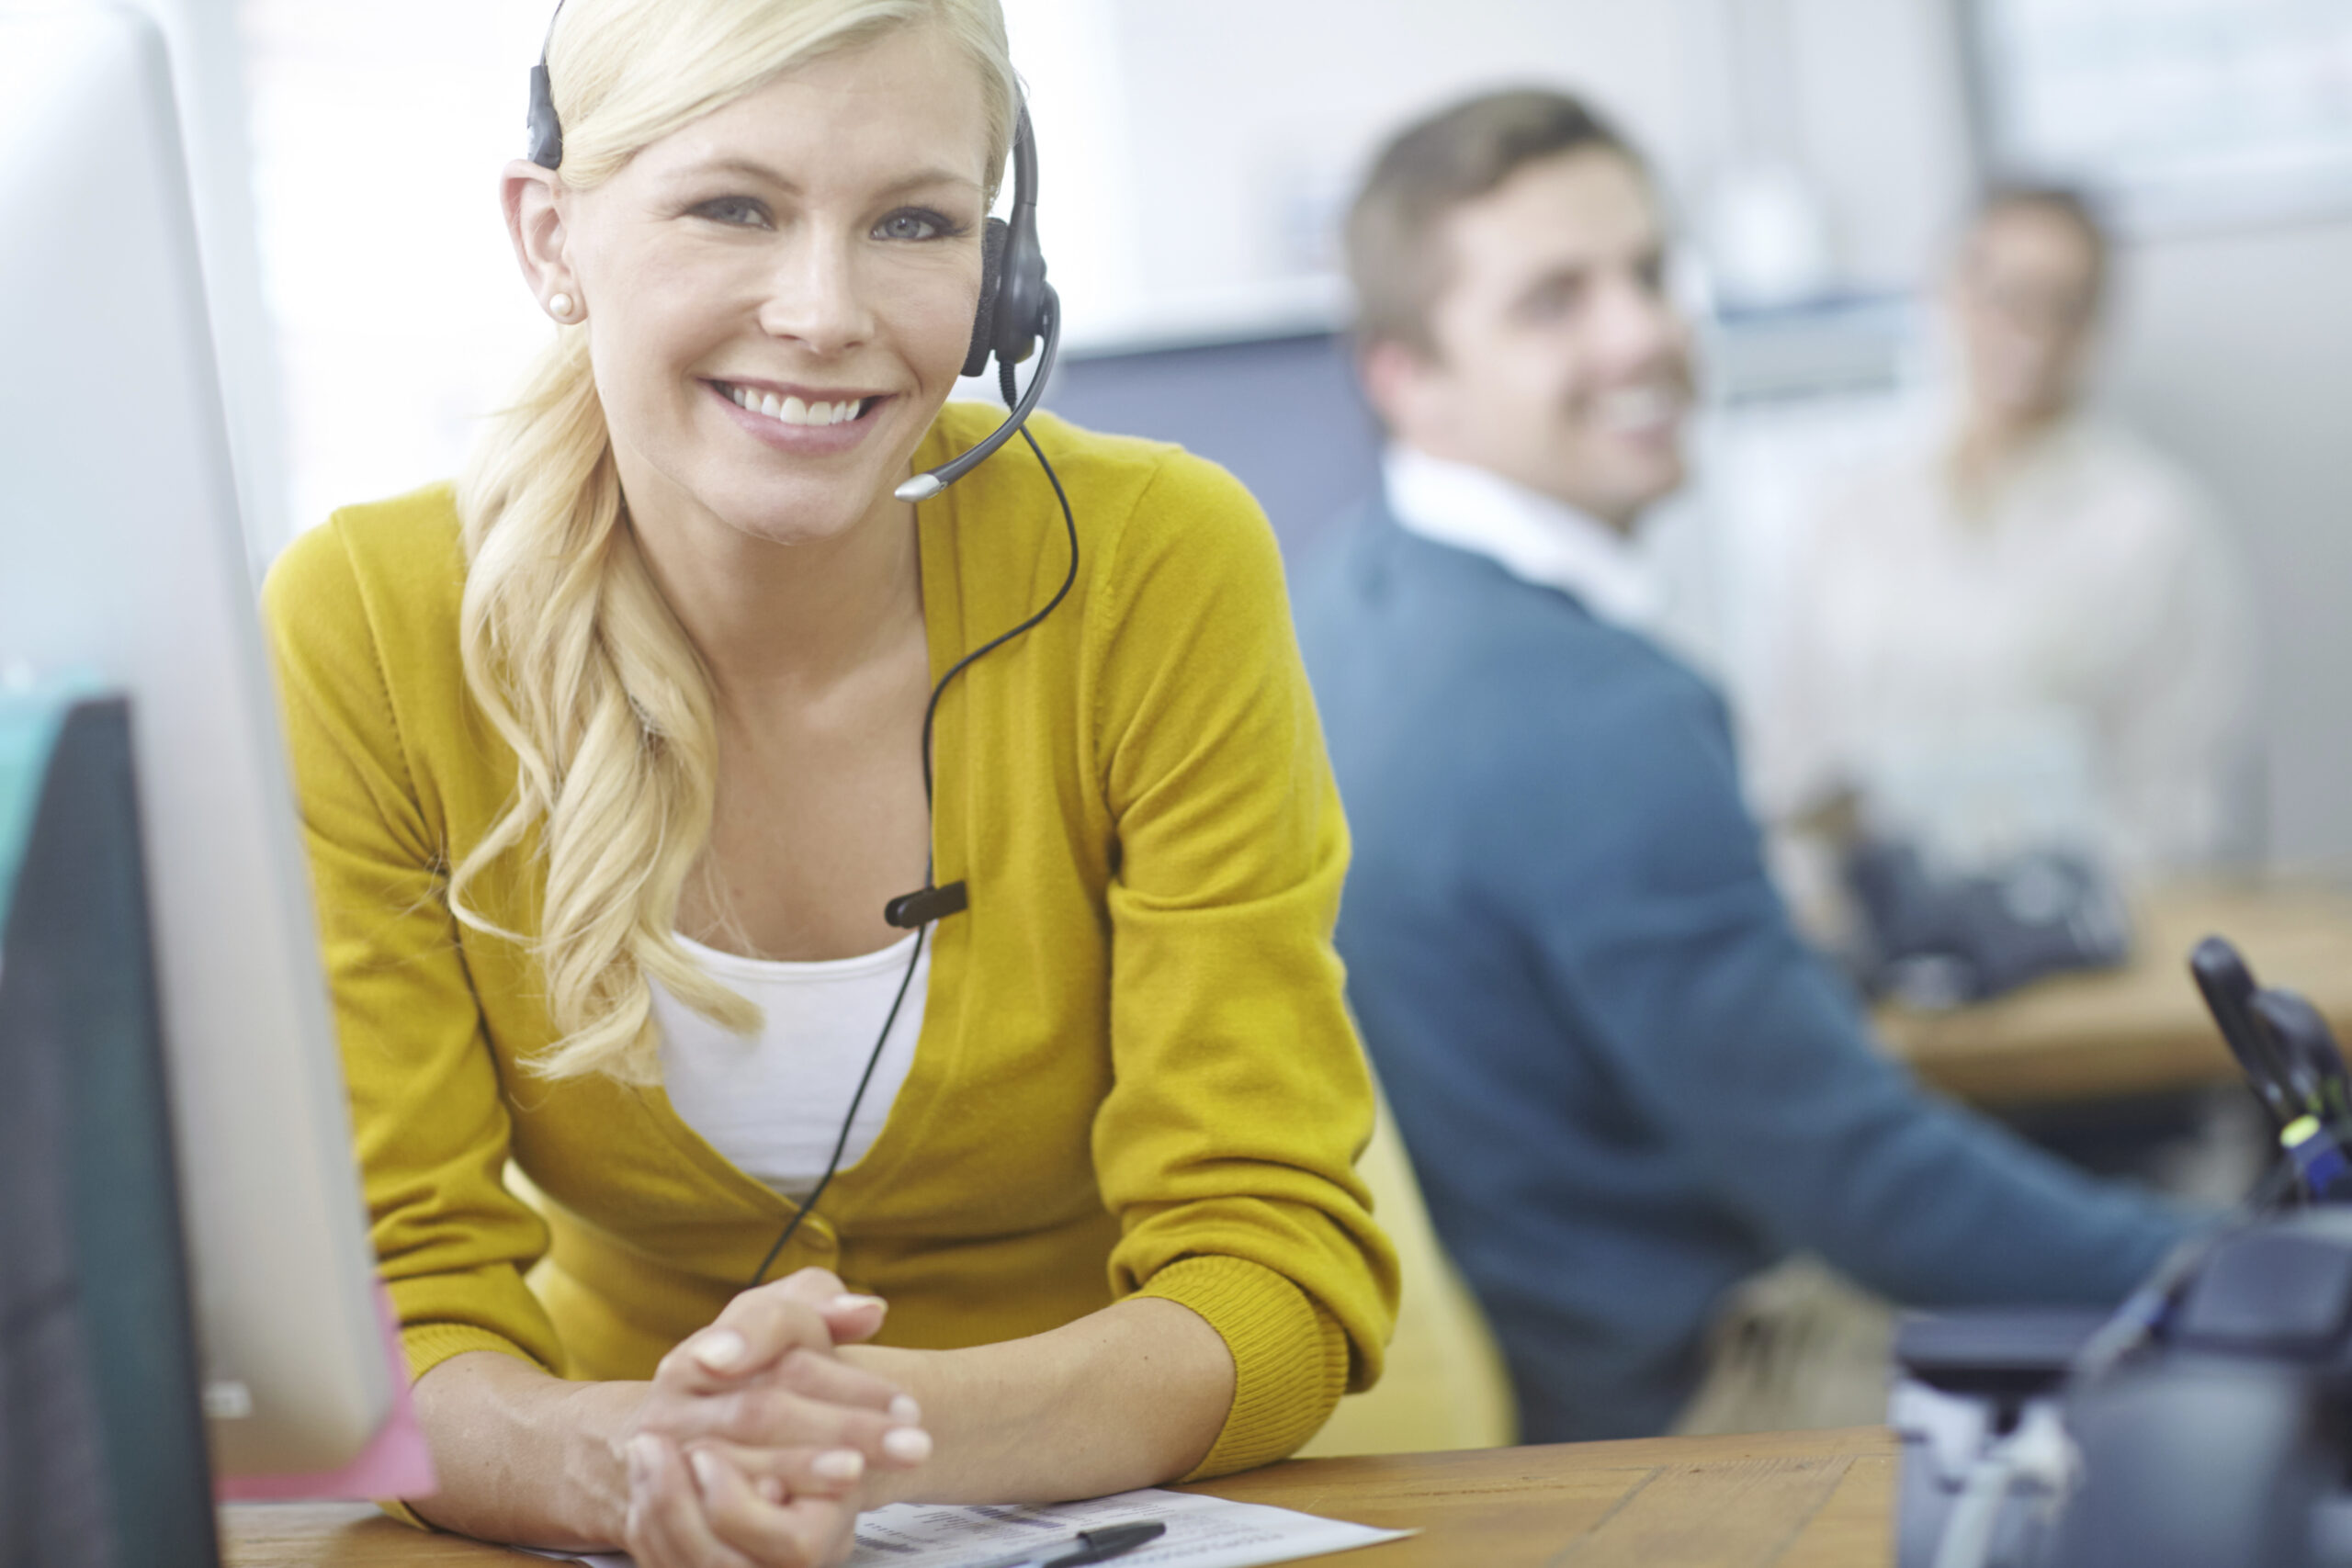 Our friendly customer support staff are ready to assist you